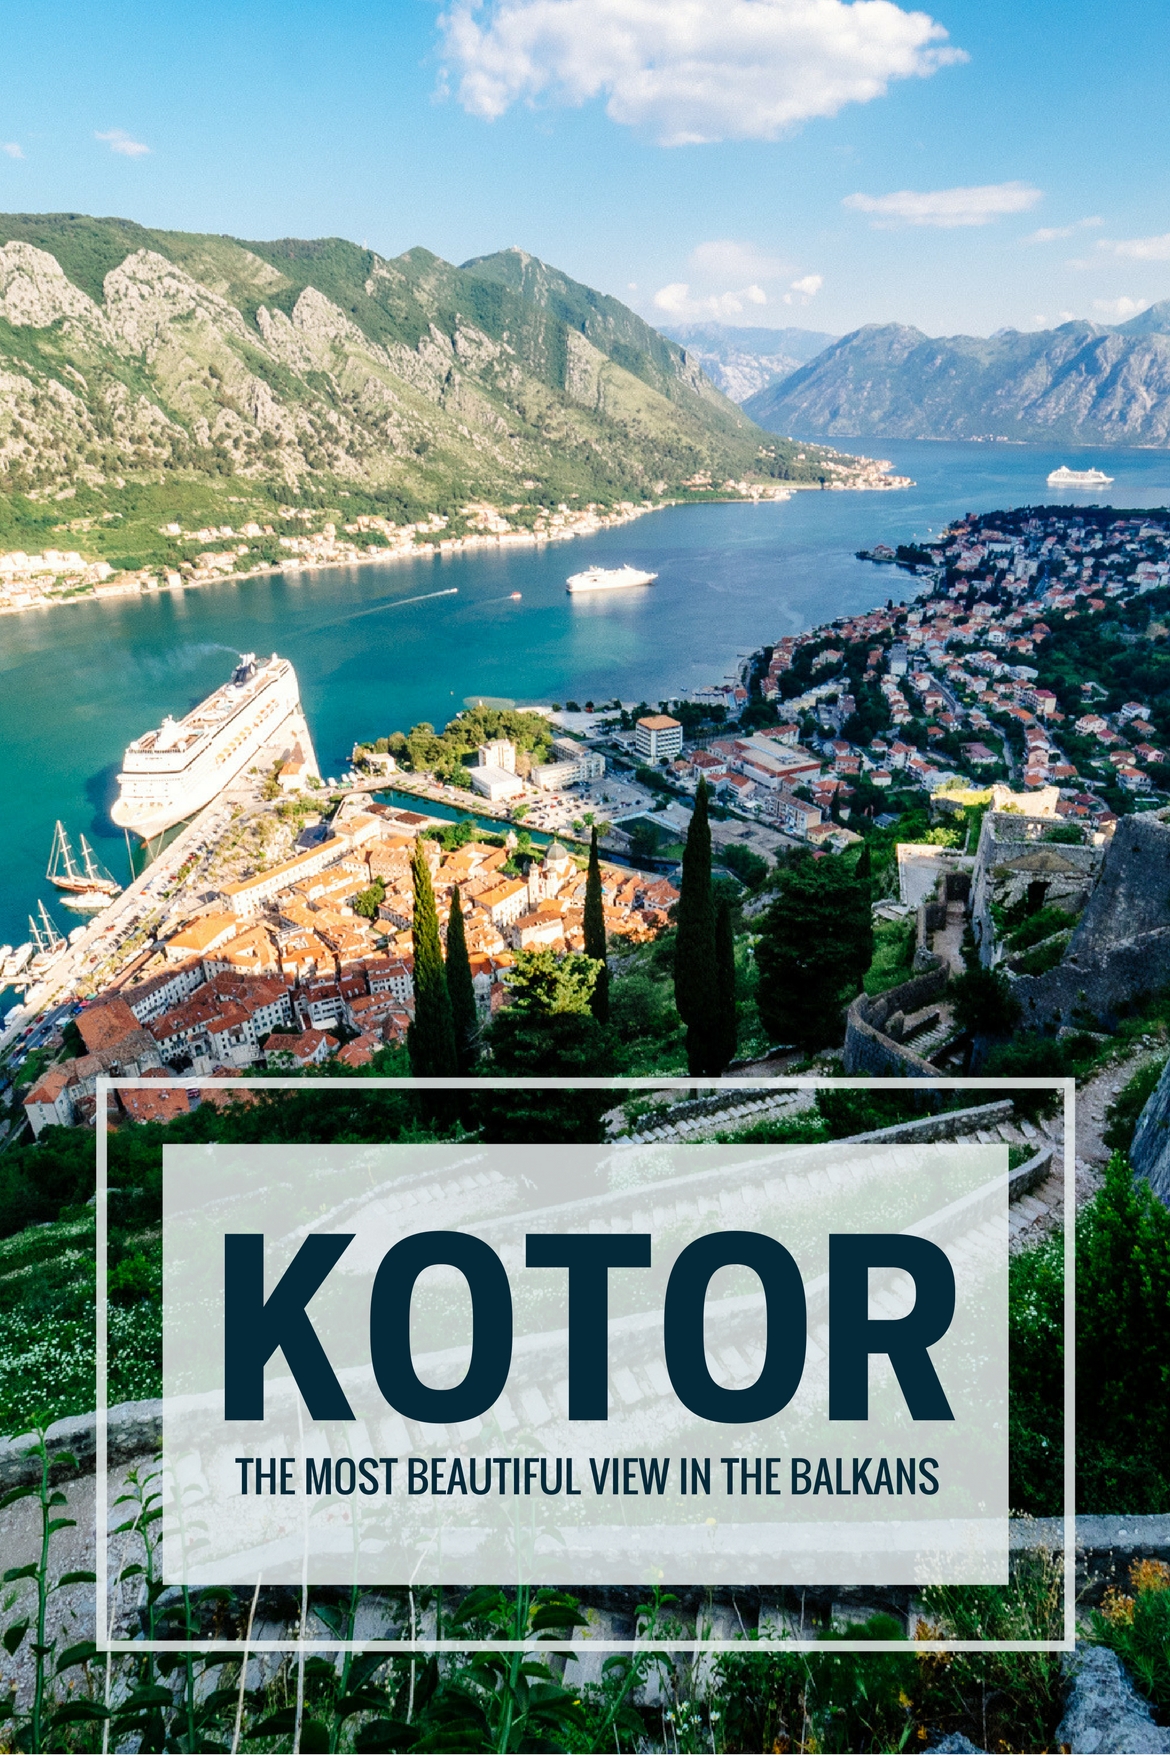 Kotor: One Day Itinerary and That View!